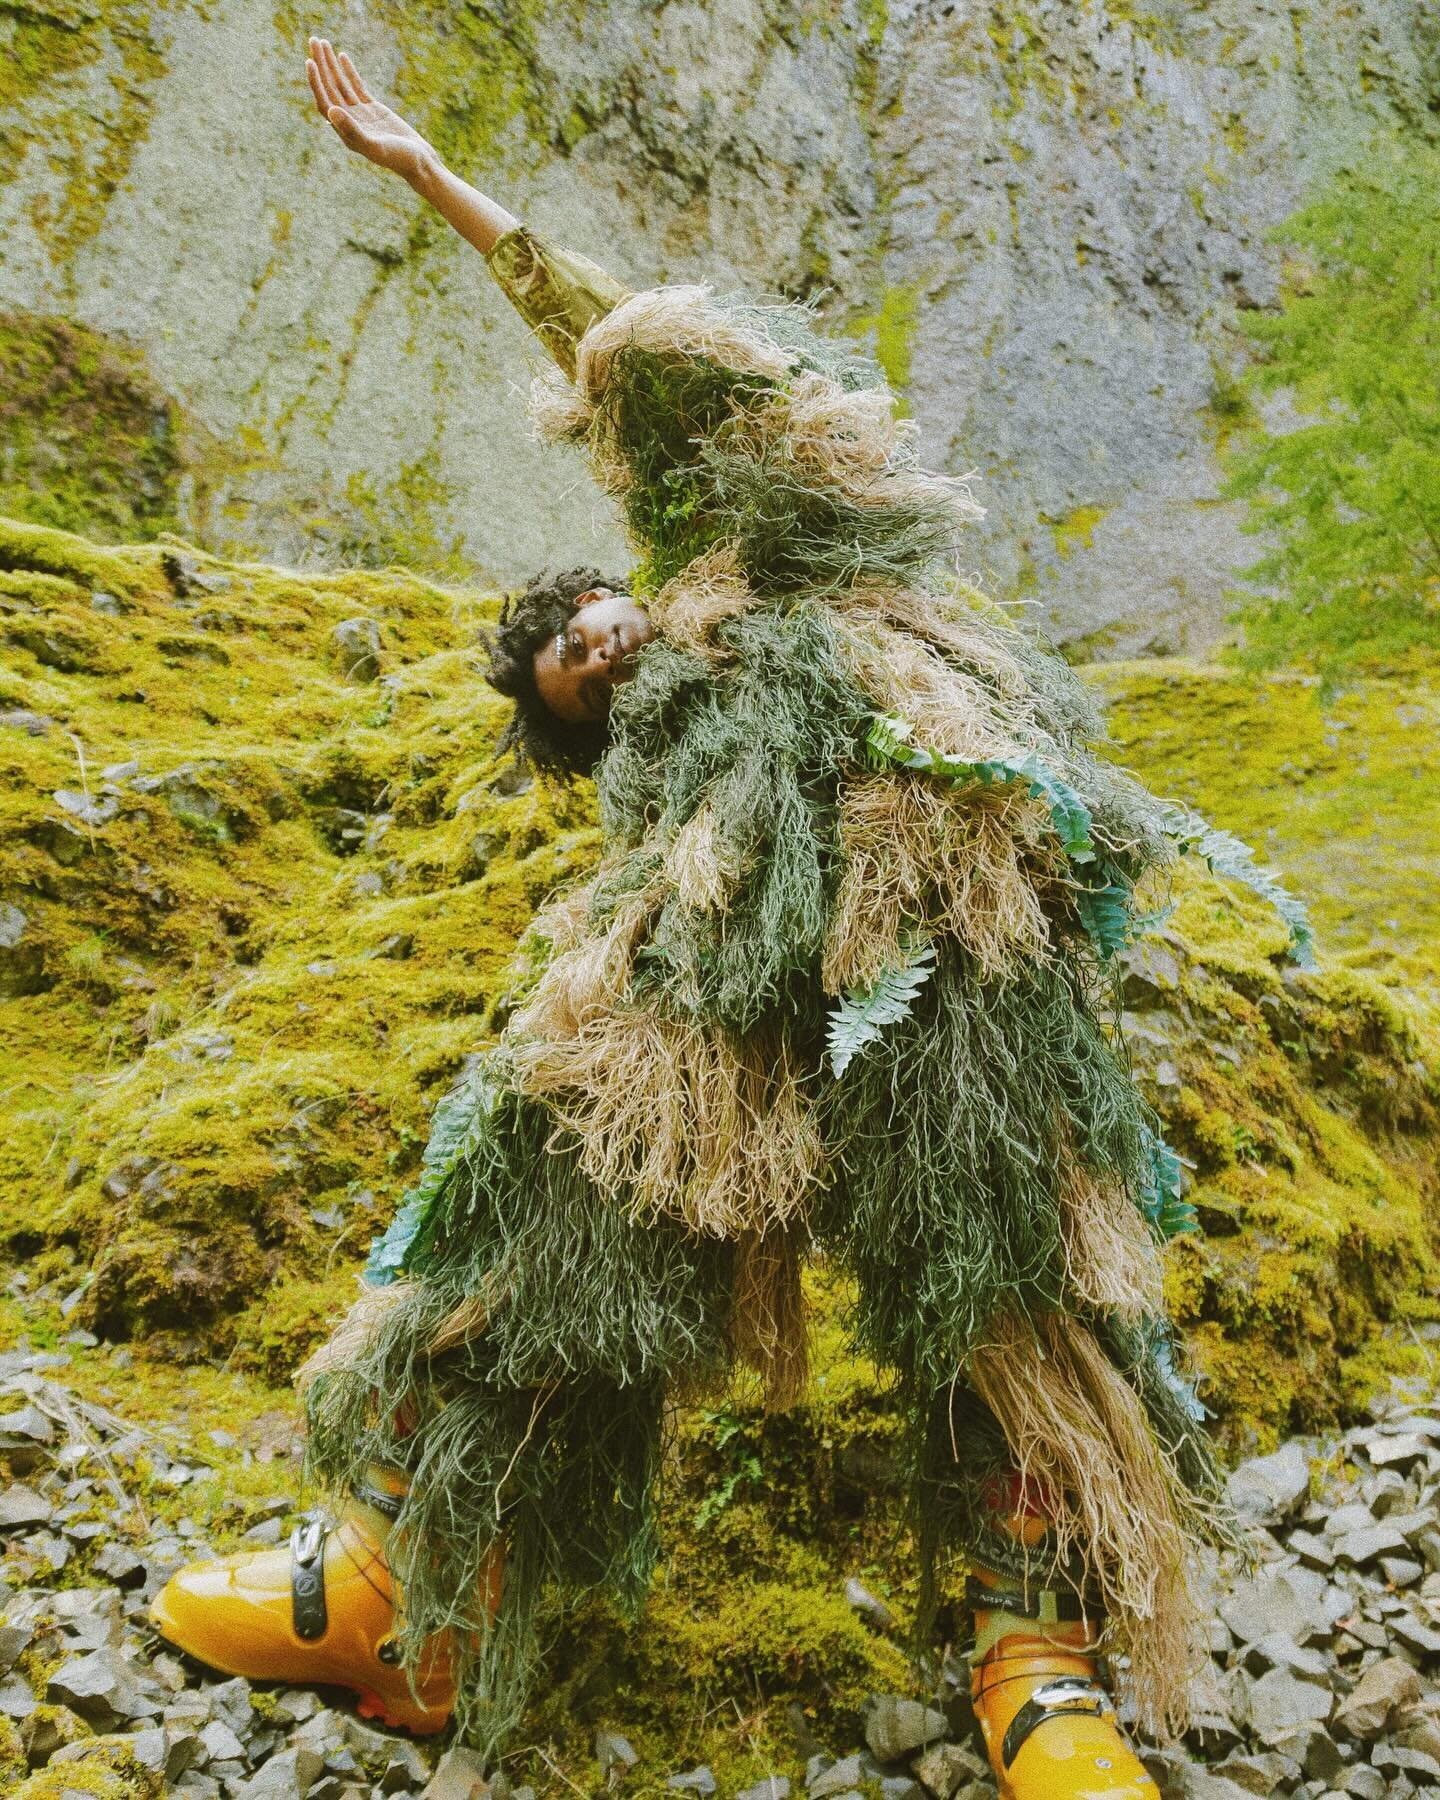 MOSS 
Blending into The Gorge

Styling: @stone.jarboe.intl
Talent: @even.if.ya.not.hot
Assistant: @gracekdonnelly